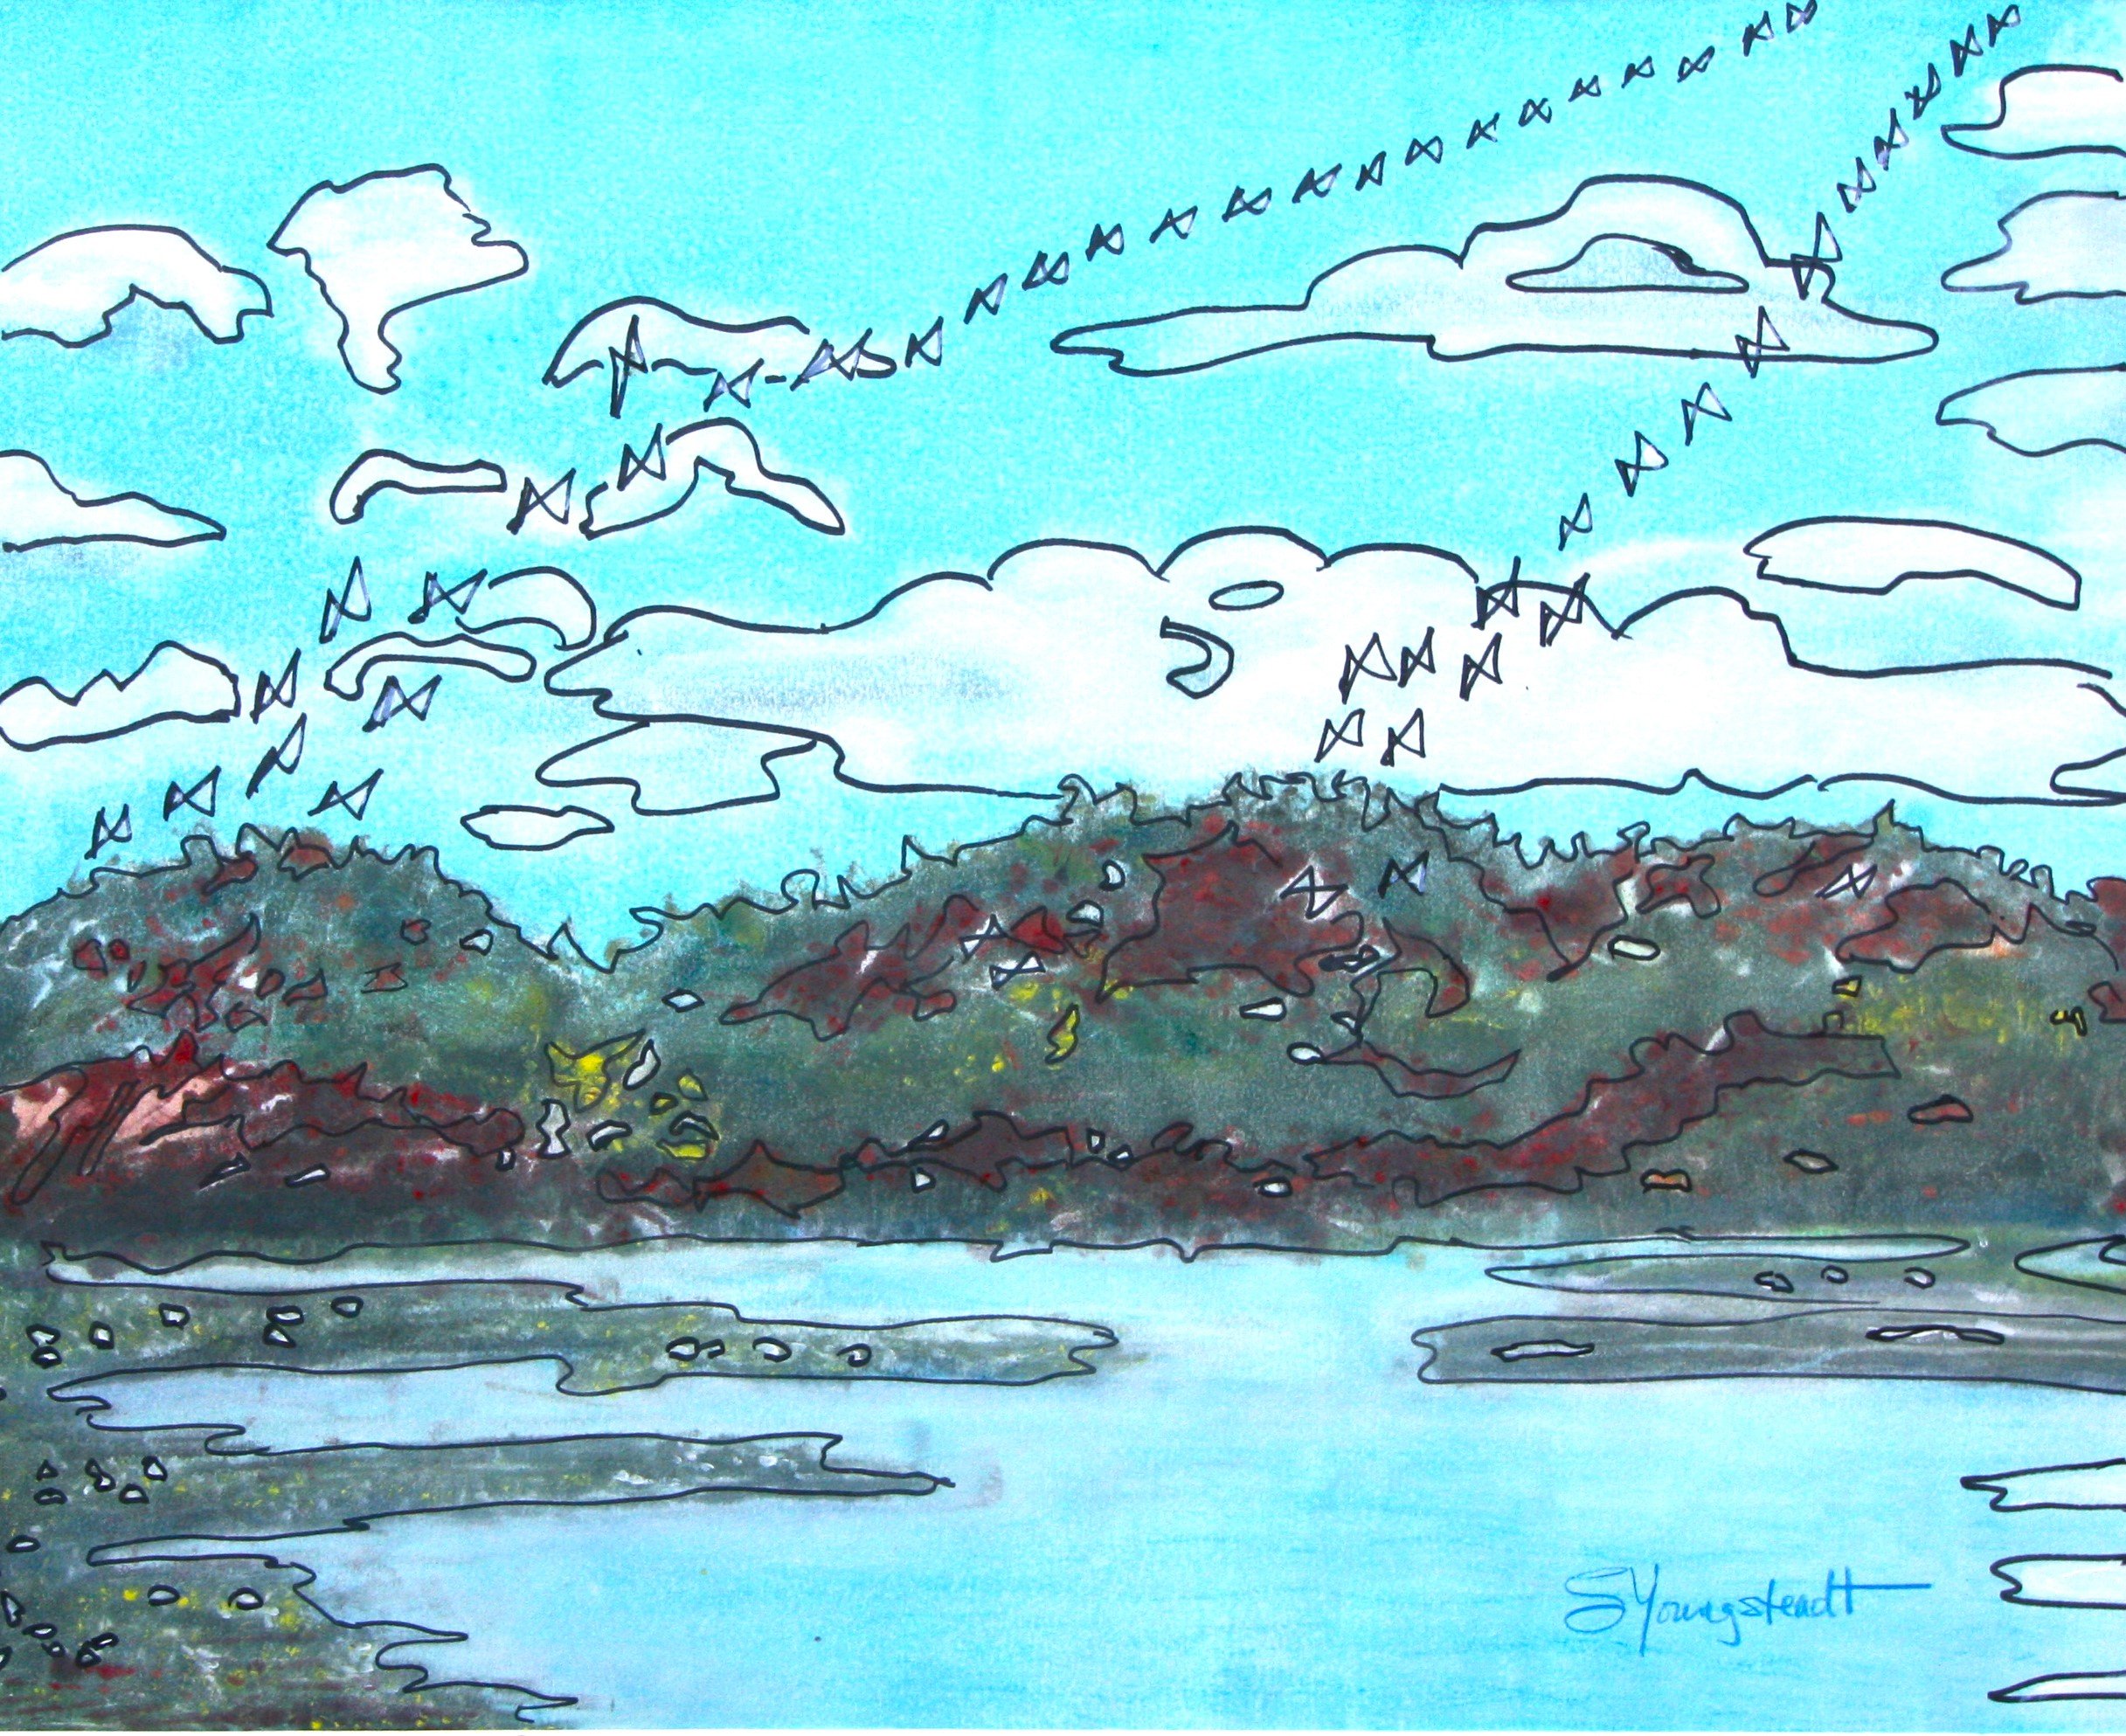 "St. Johns River Birds" by Susana Youngsteadt